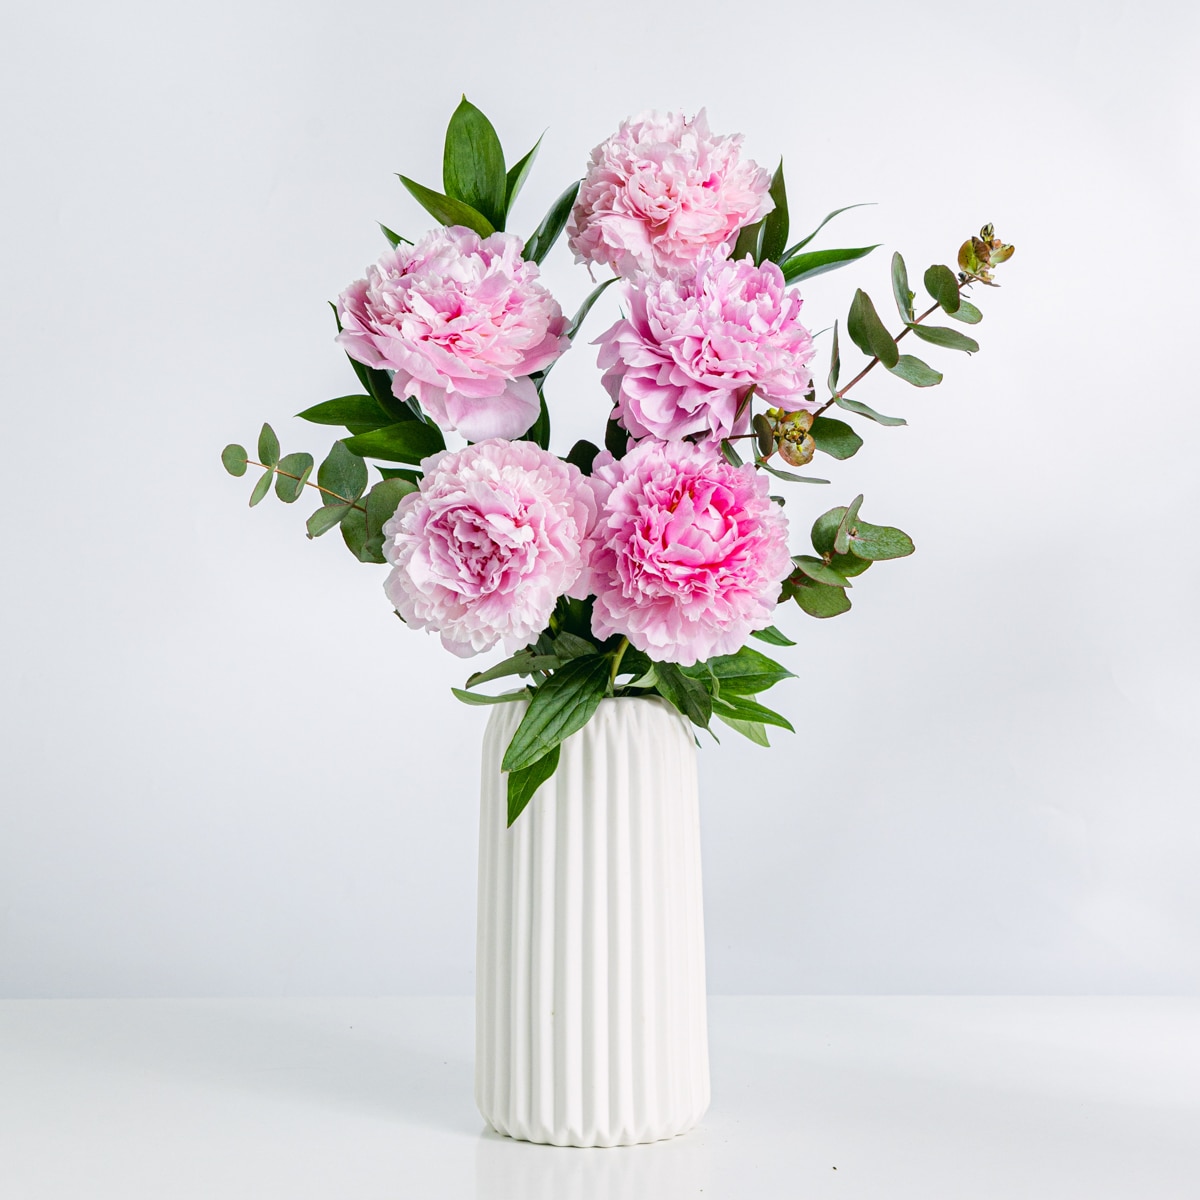 Bouquet of pink peonies on a white vase